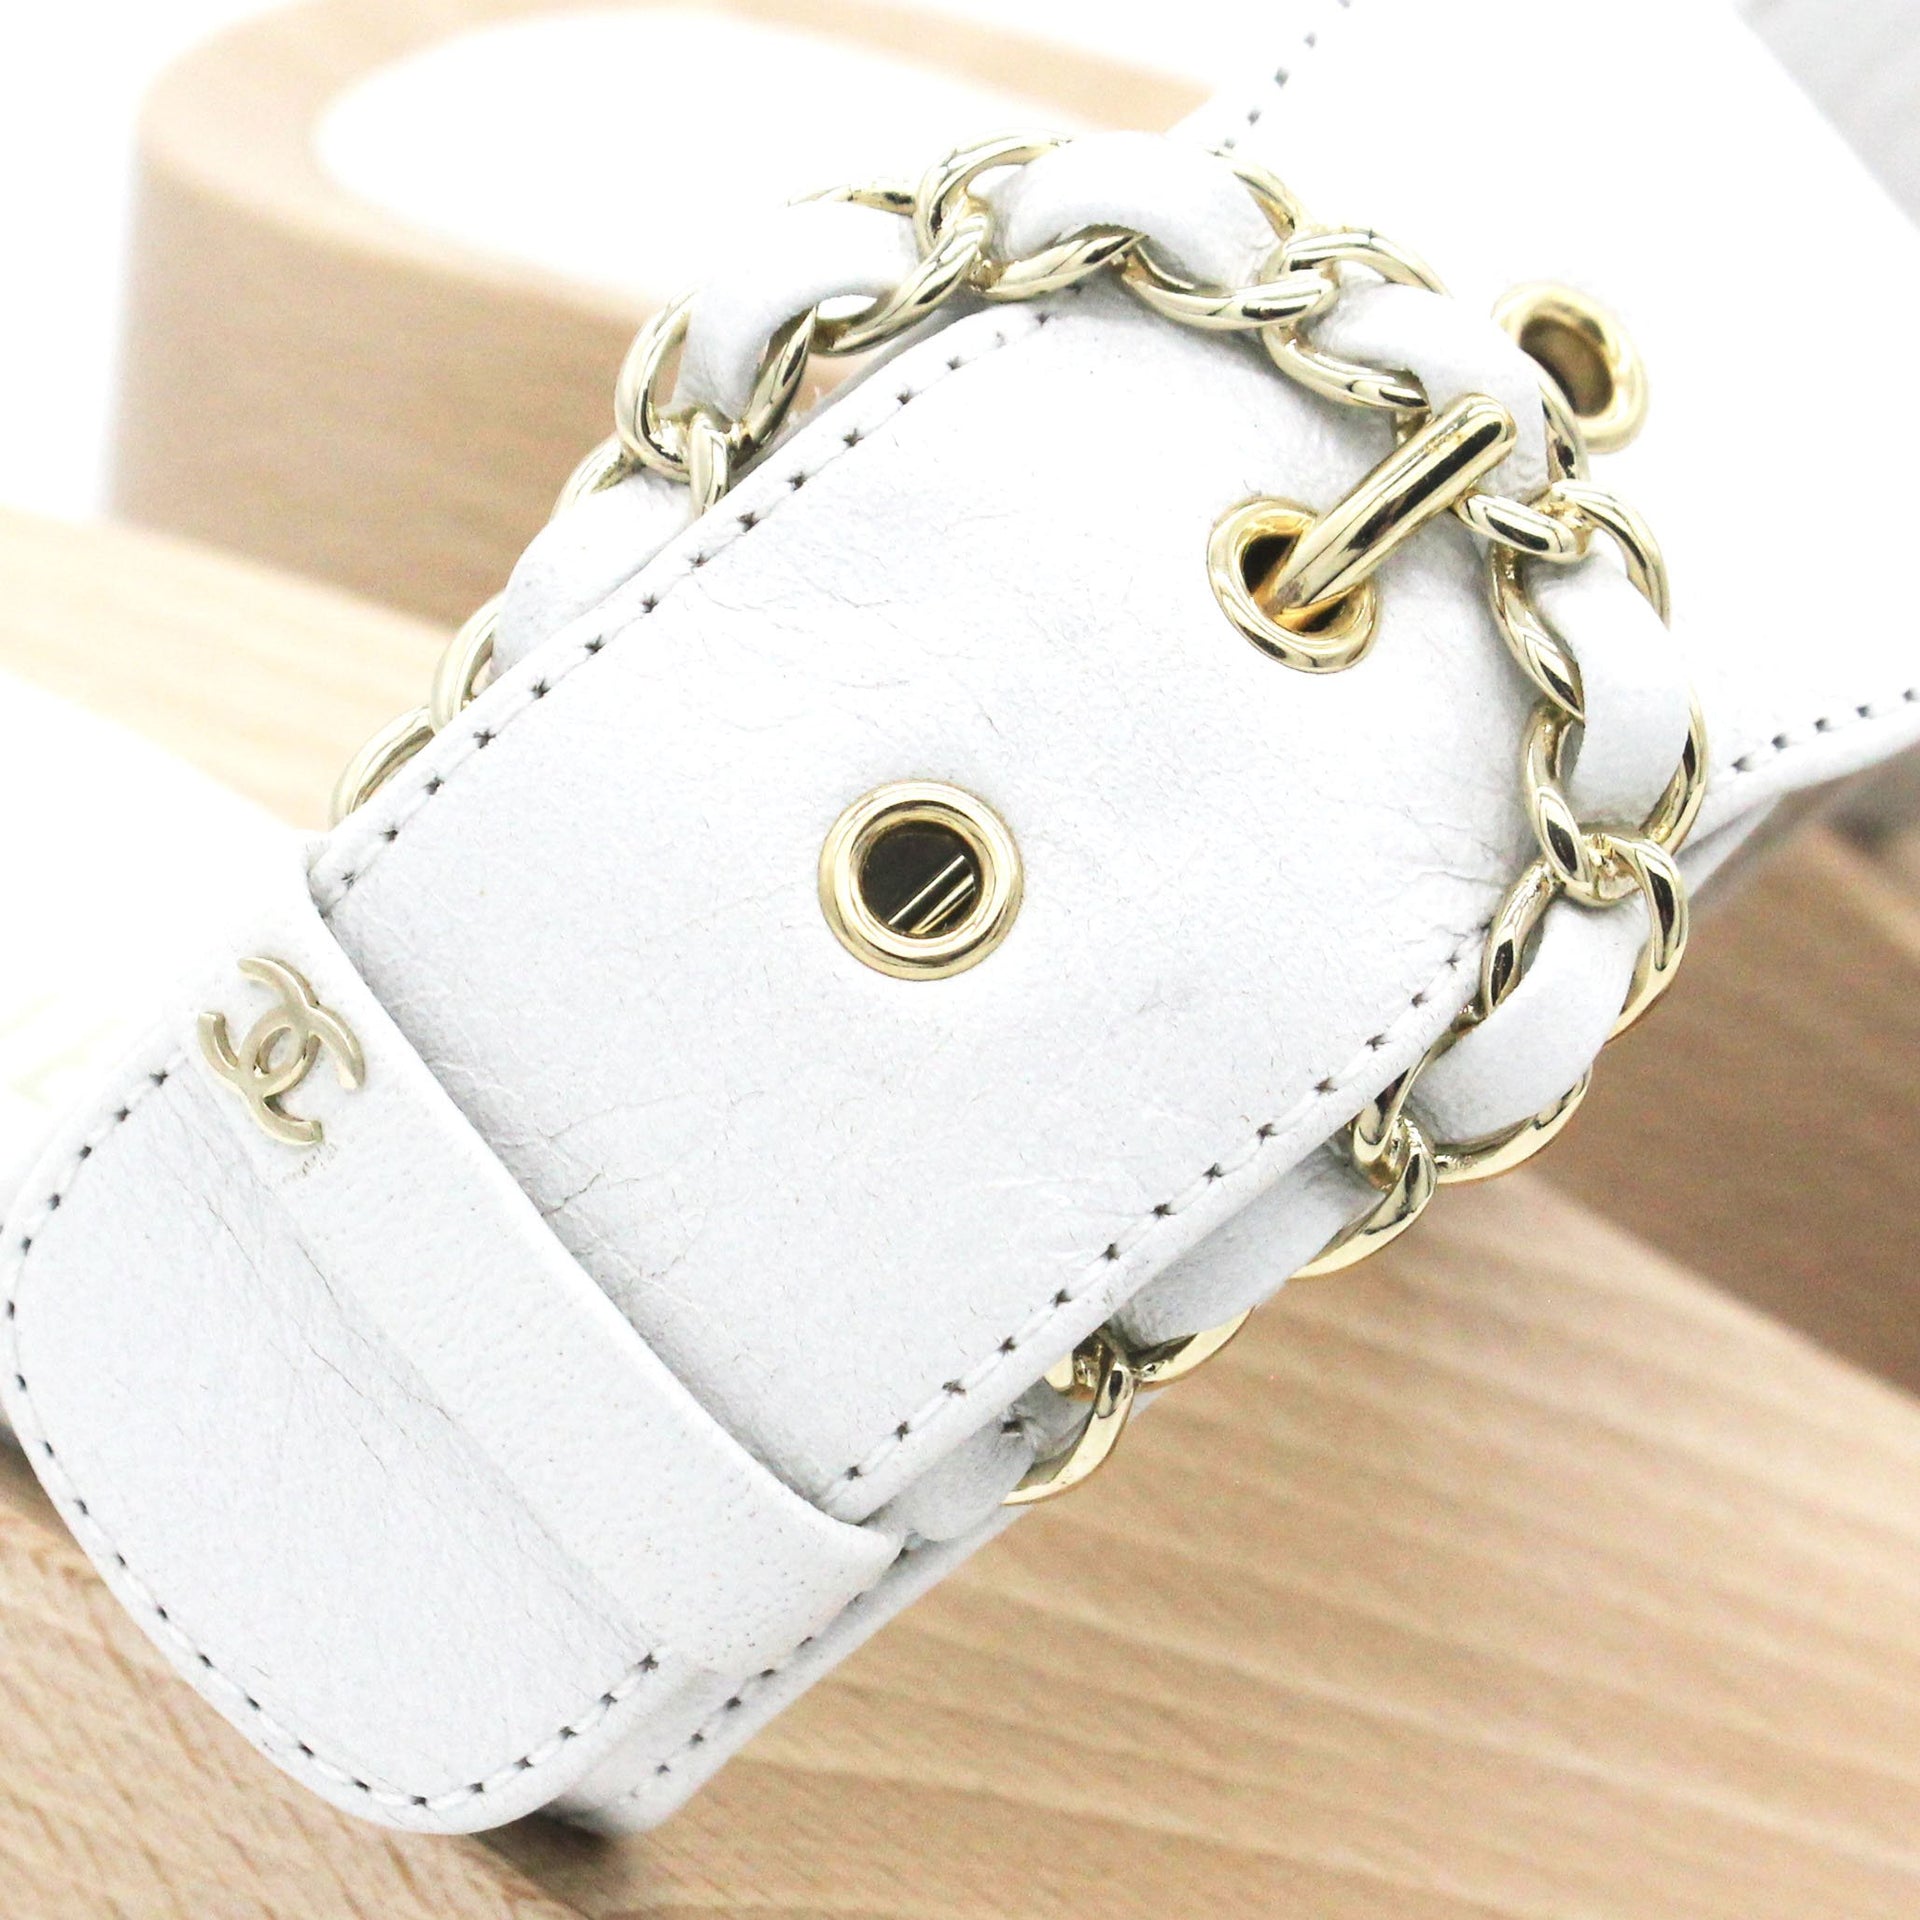 White Wooden Buckle Chain Mule Sandals